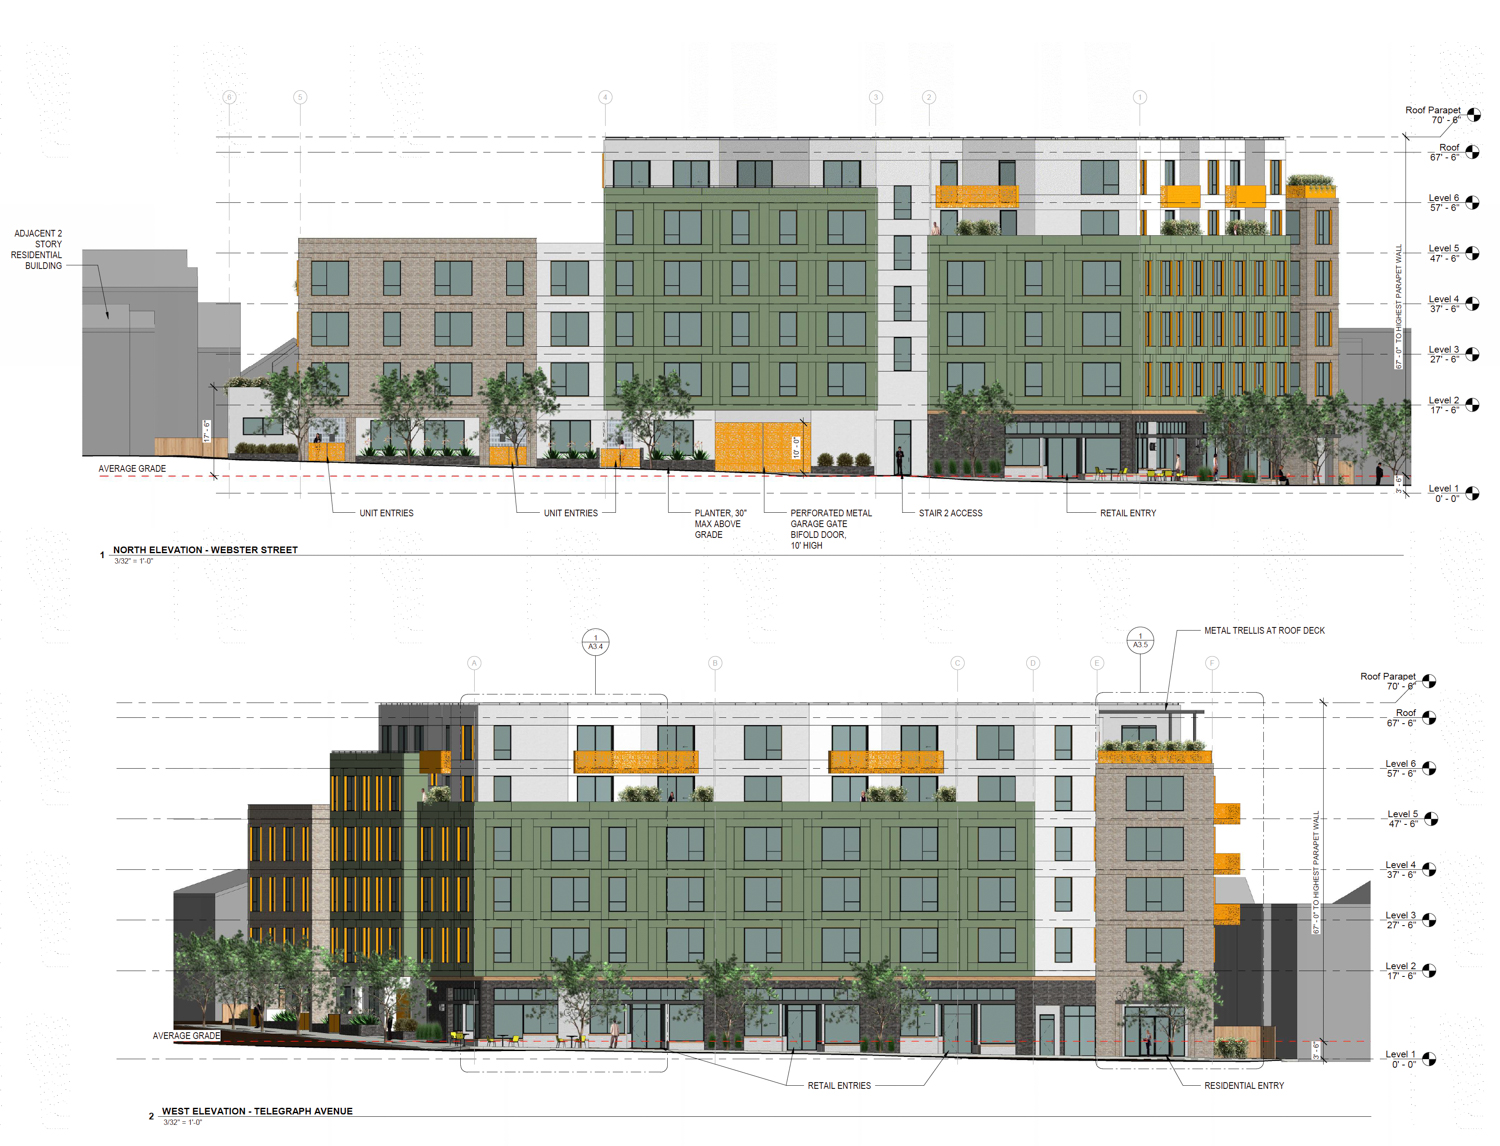 3031 Telegraph Avenue facade elevations for the north and west view, rendering by Devi Dutta Architecture